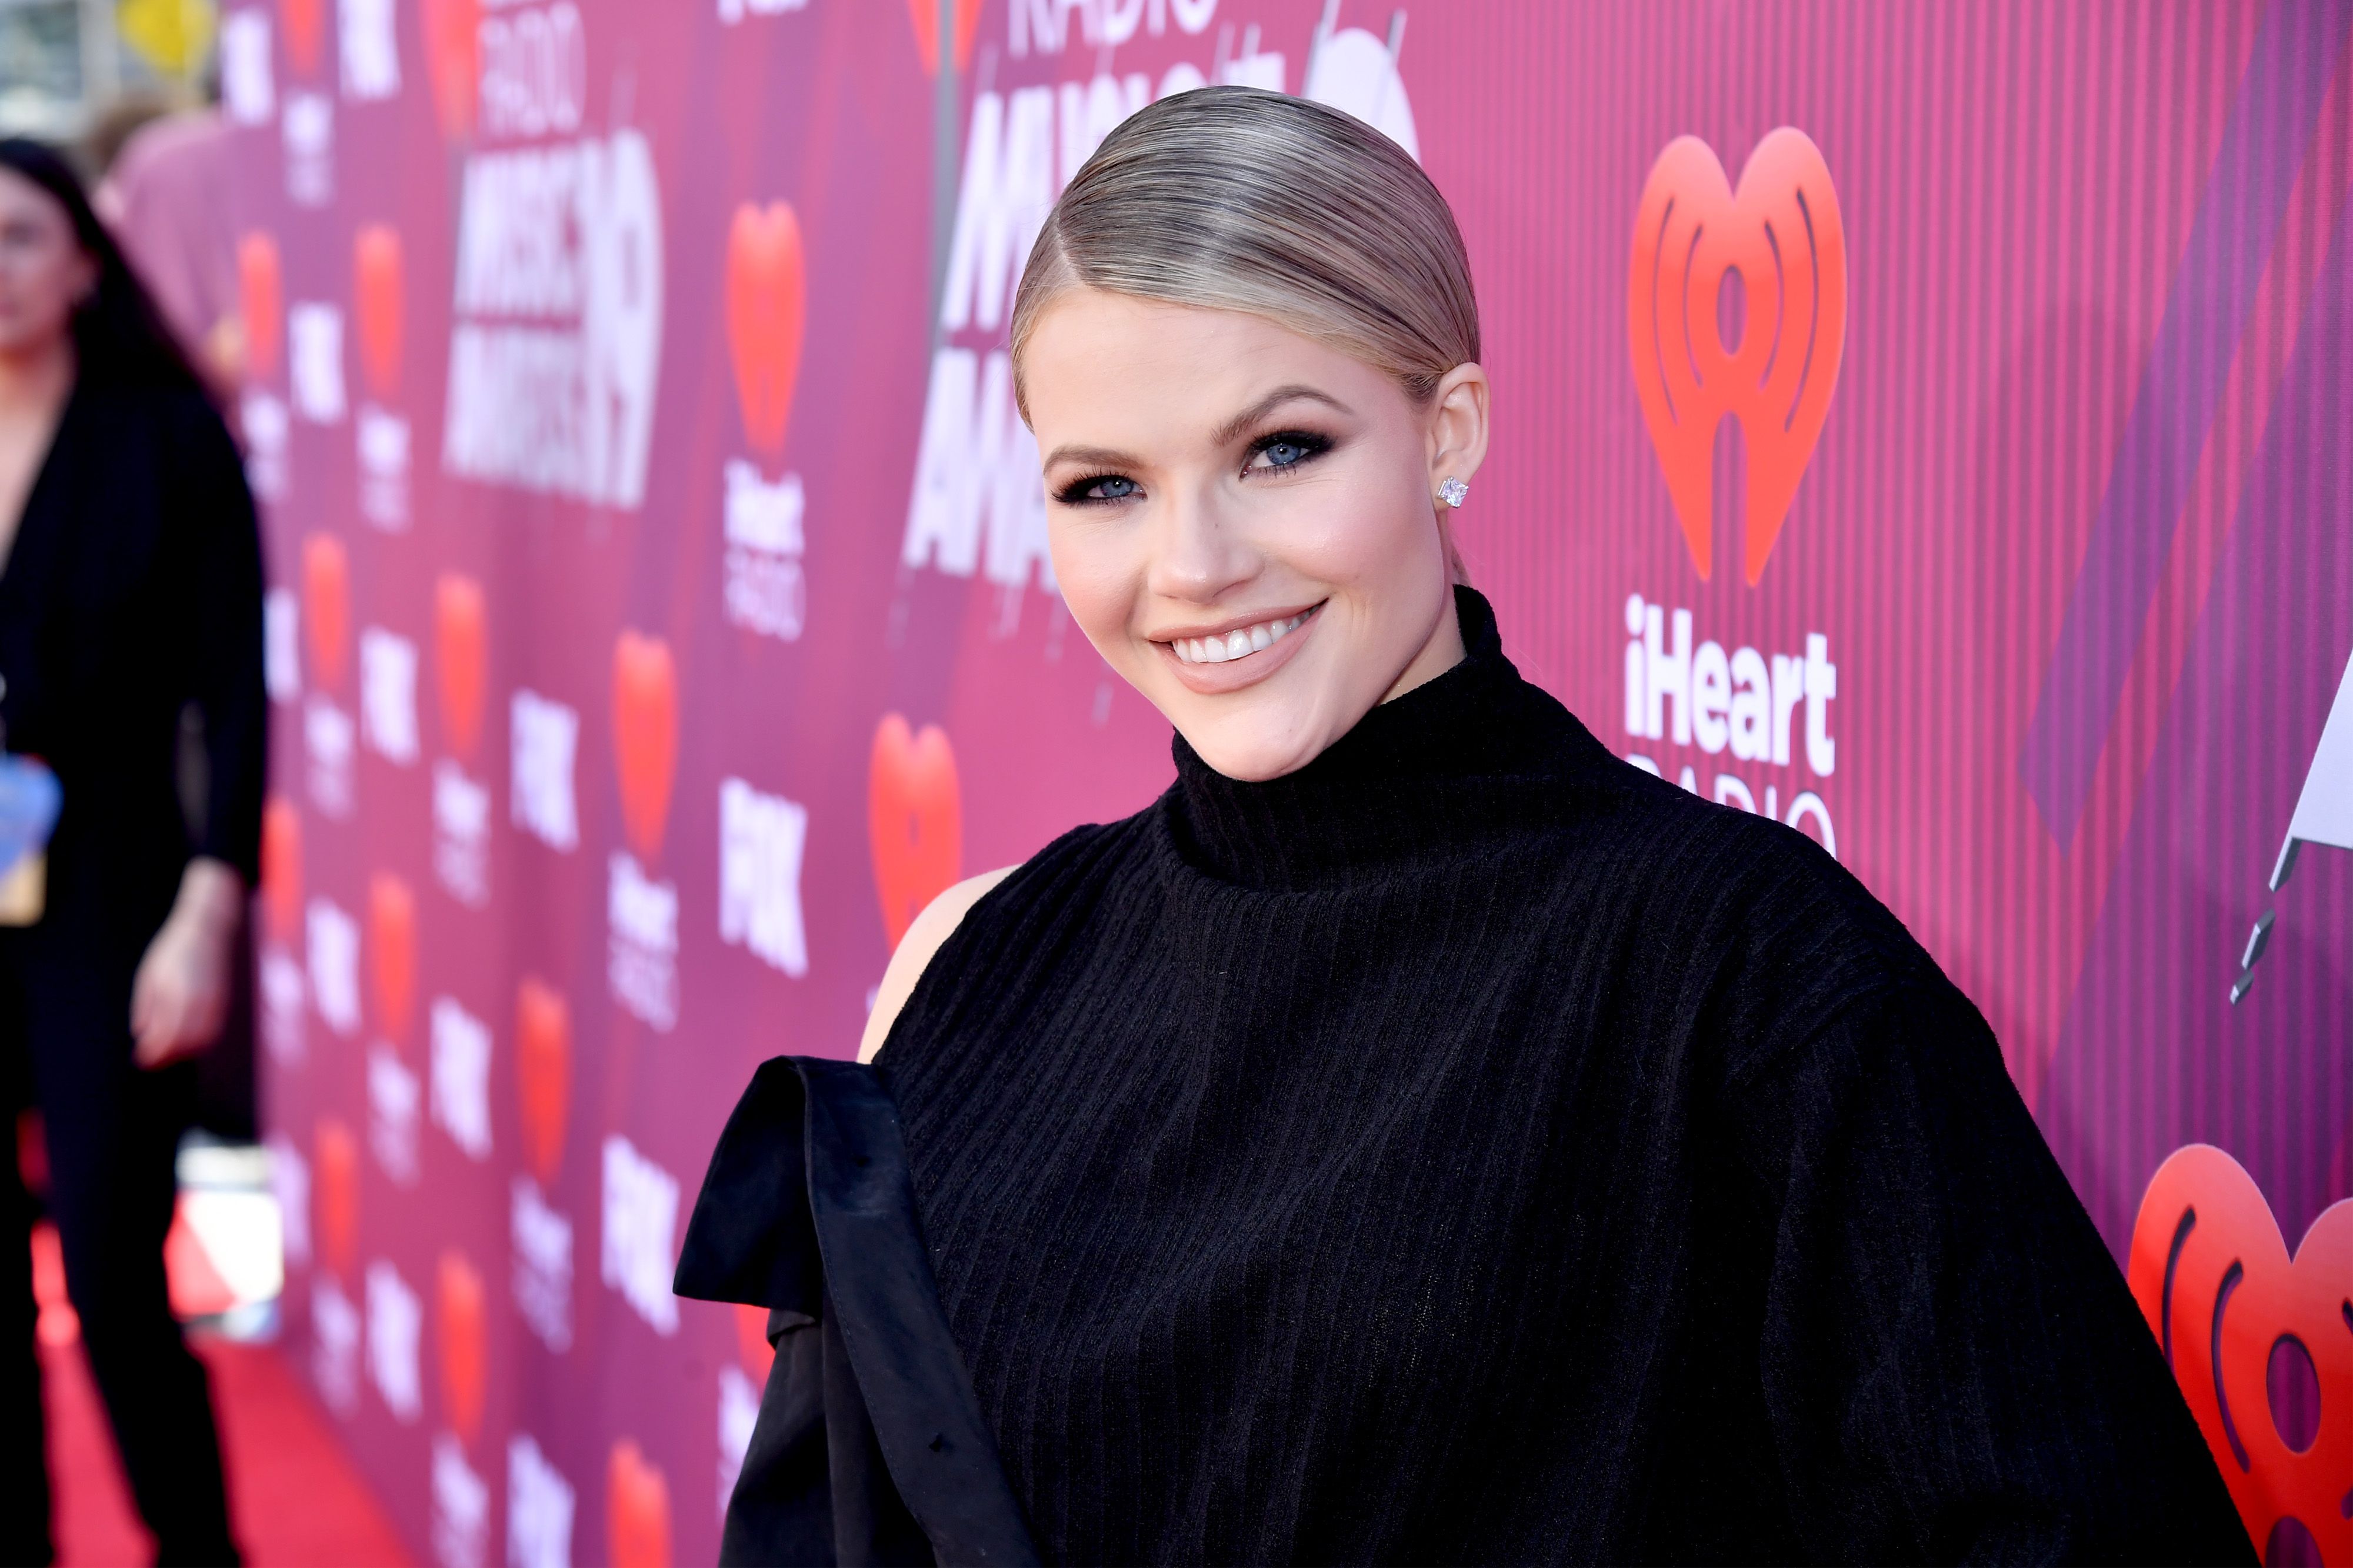 Witney Carson at the 2019 iHeartRadio Music Awards which broadcasted live on FOX at Microsoft Theater on March 14, 2019 | Photo: Getty Images